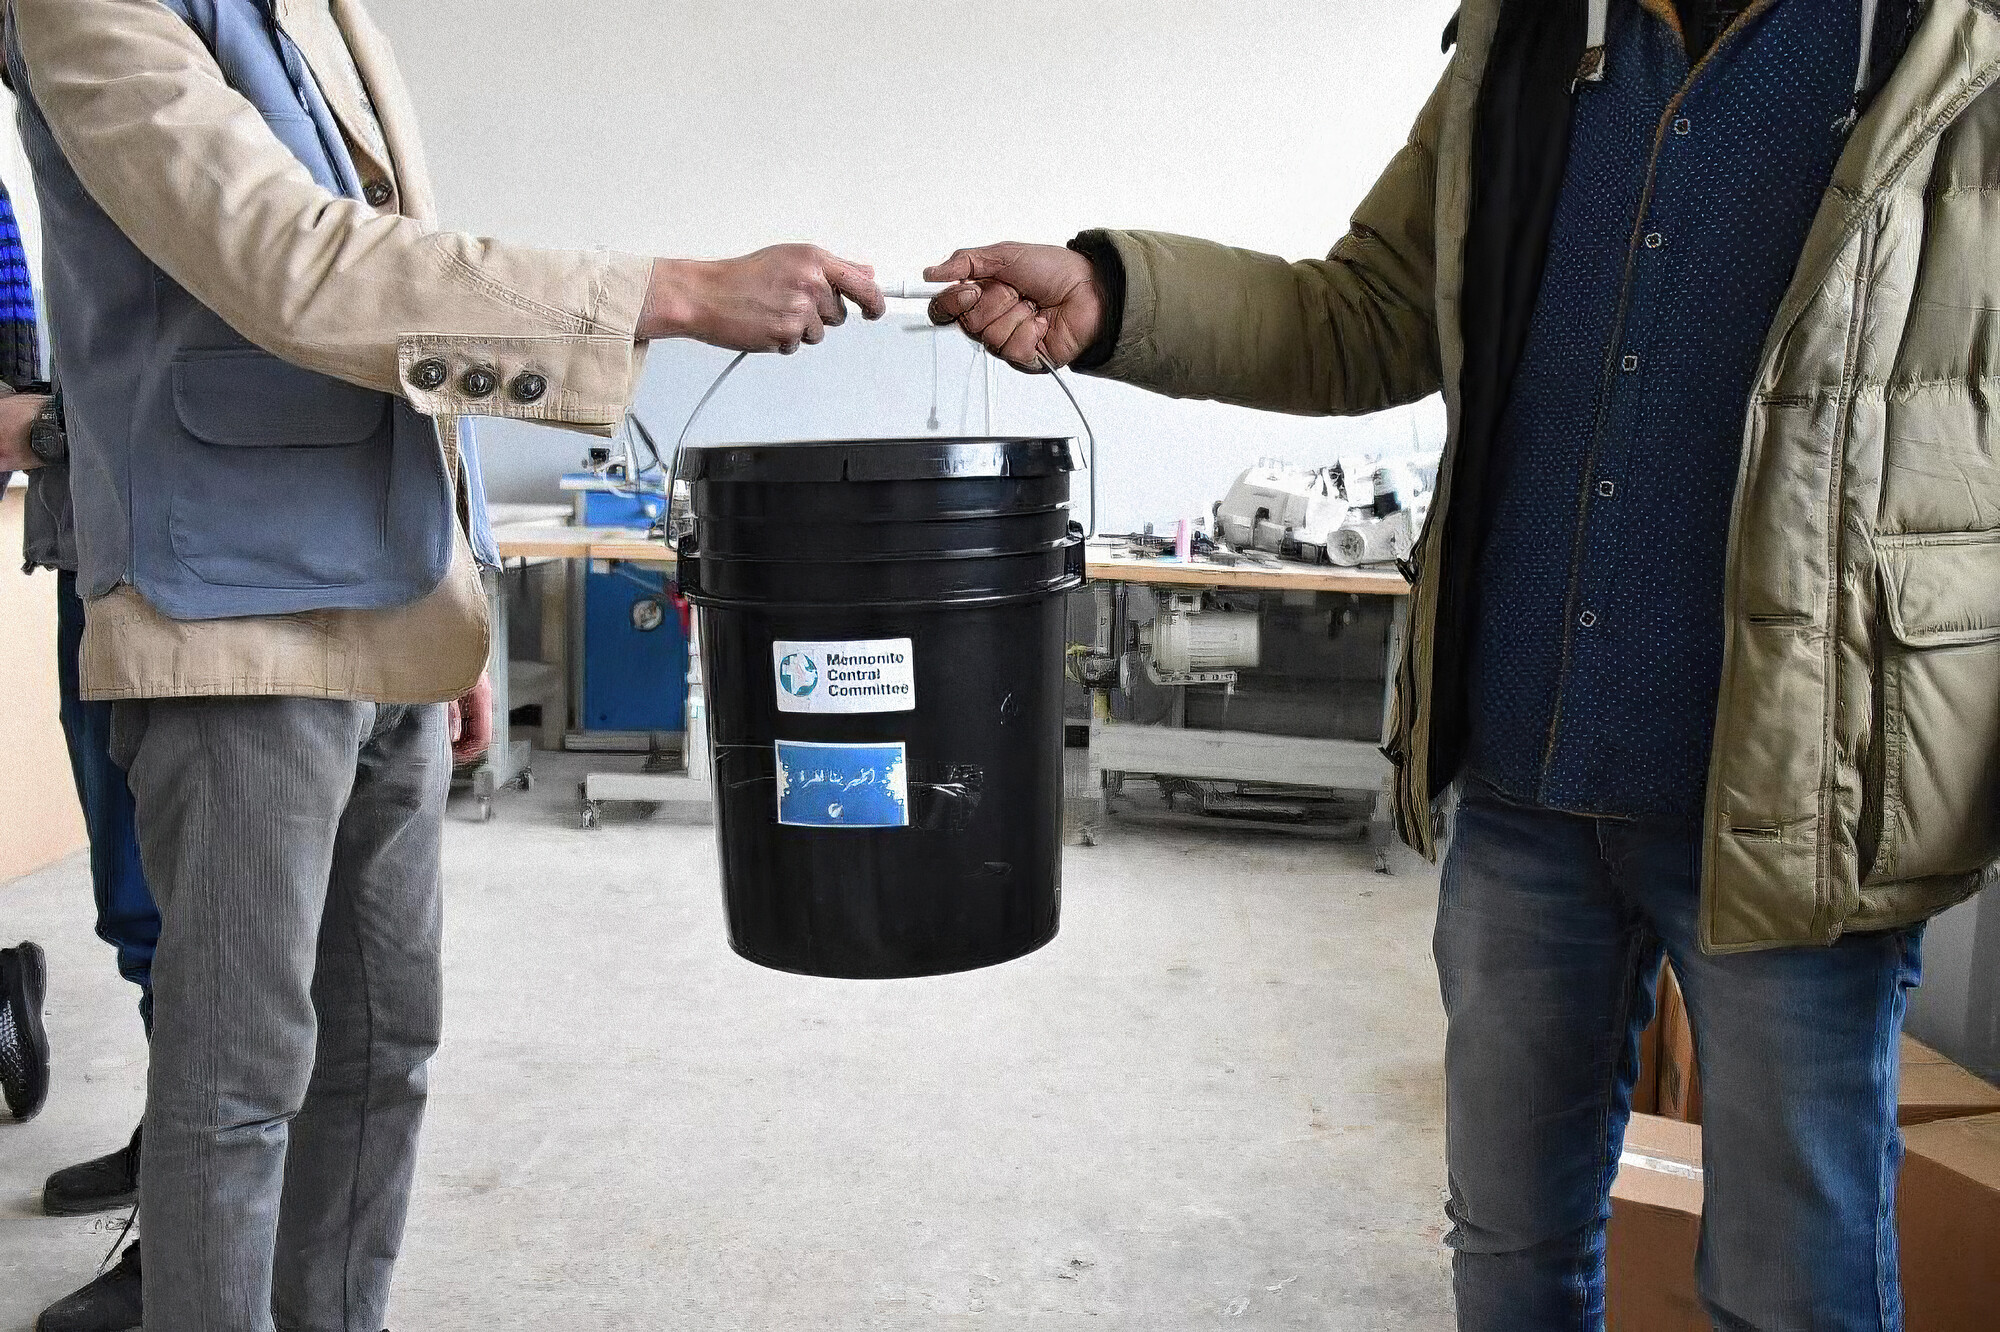 A person hands another person a 5 gallon bucket.